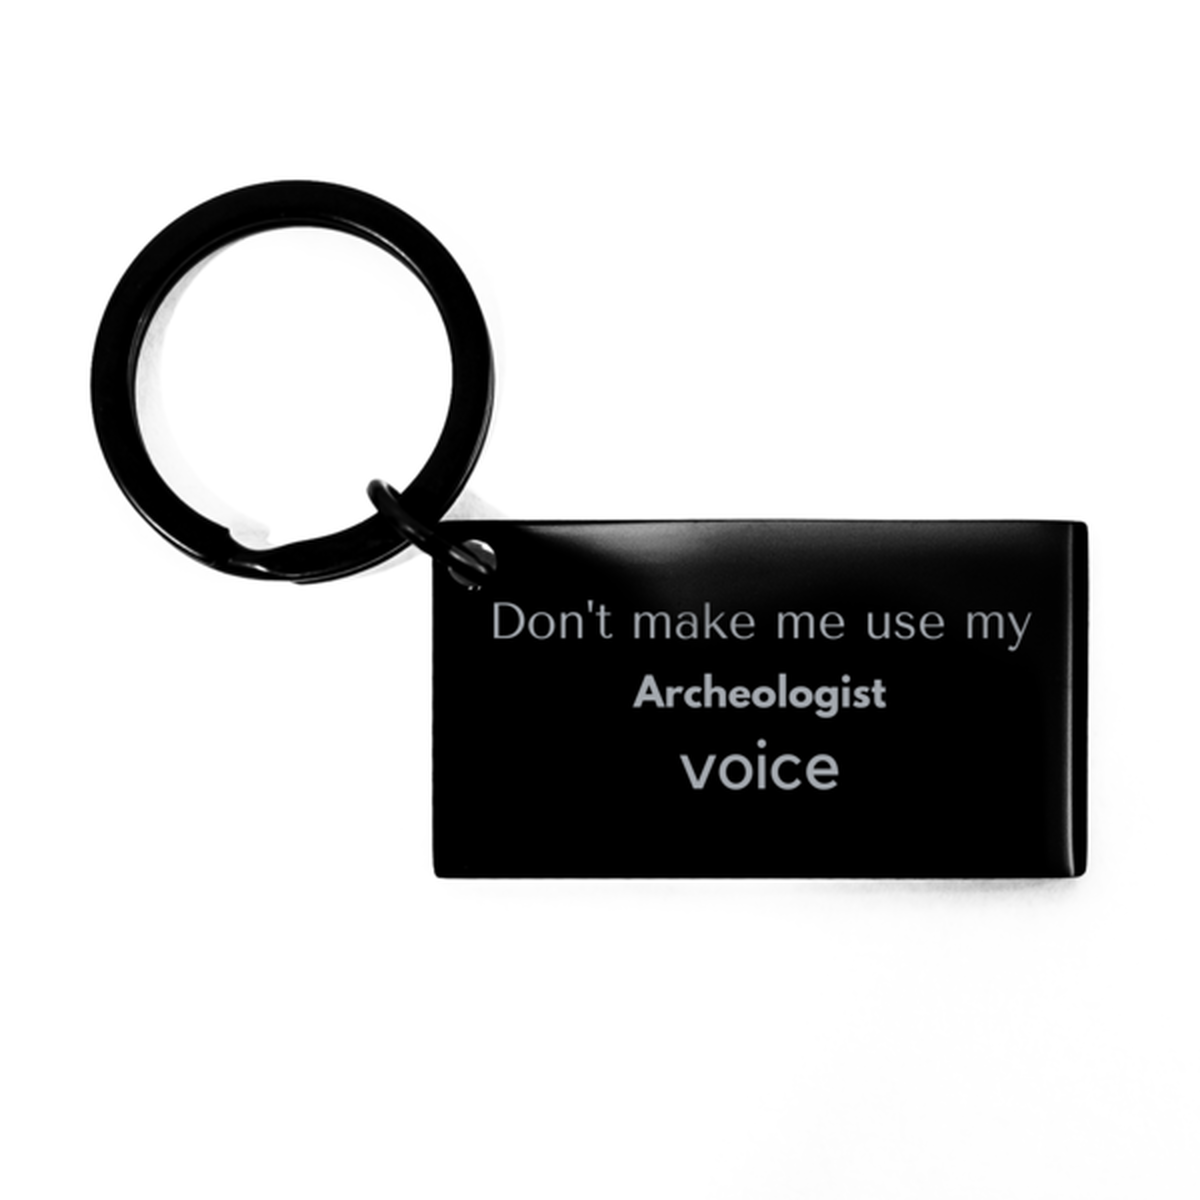 Don't make me use my Archeologist voice, Sarcasm Archeologist Gifts, Christmas Archeologist Keychain Birthday Unique Gifts For Archeologist Coworkers, Men, Women, Colleague, Friends